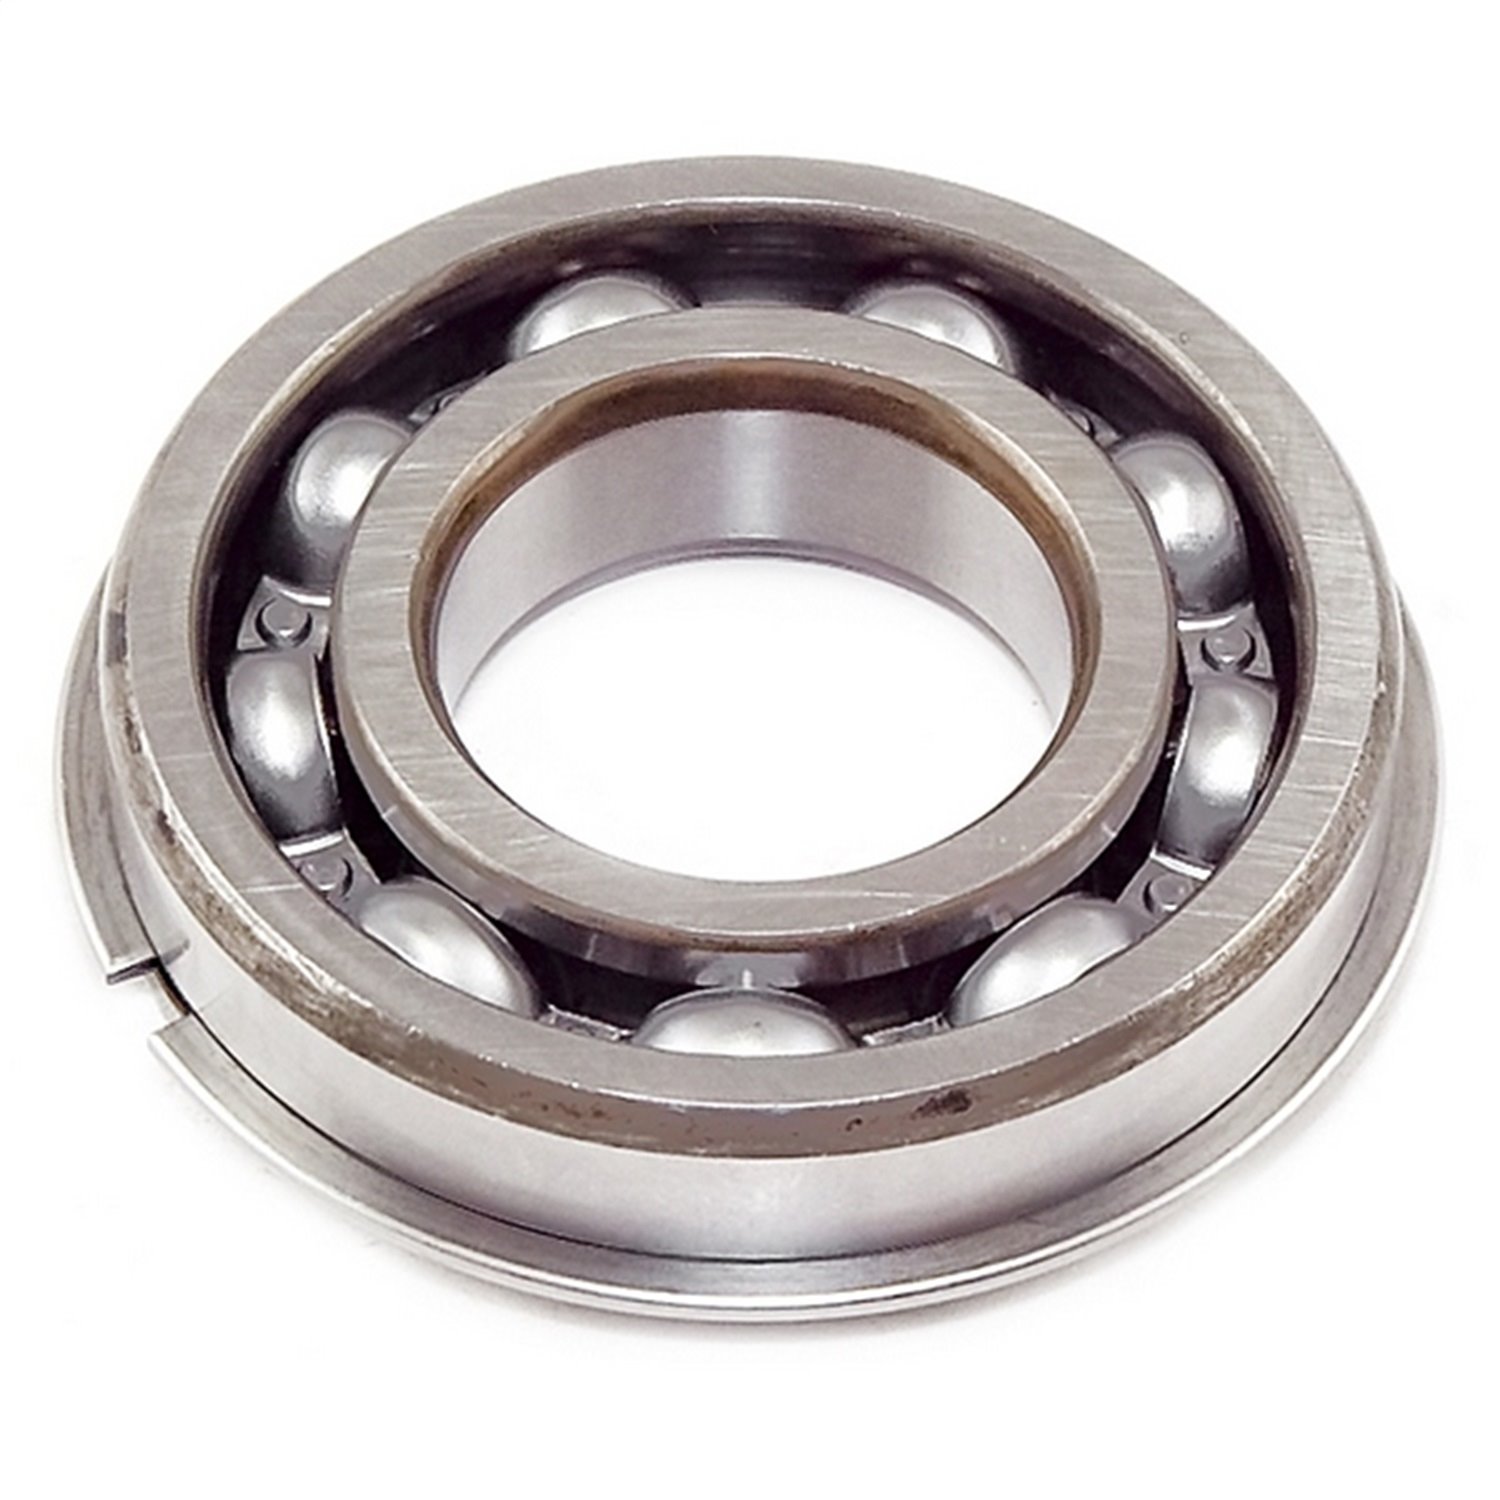 This transmission input/output bearing from Omix-ADA fits 41-45 MBs & GPWs with a T84 transmission a